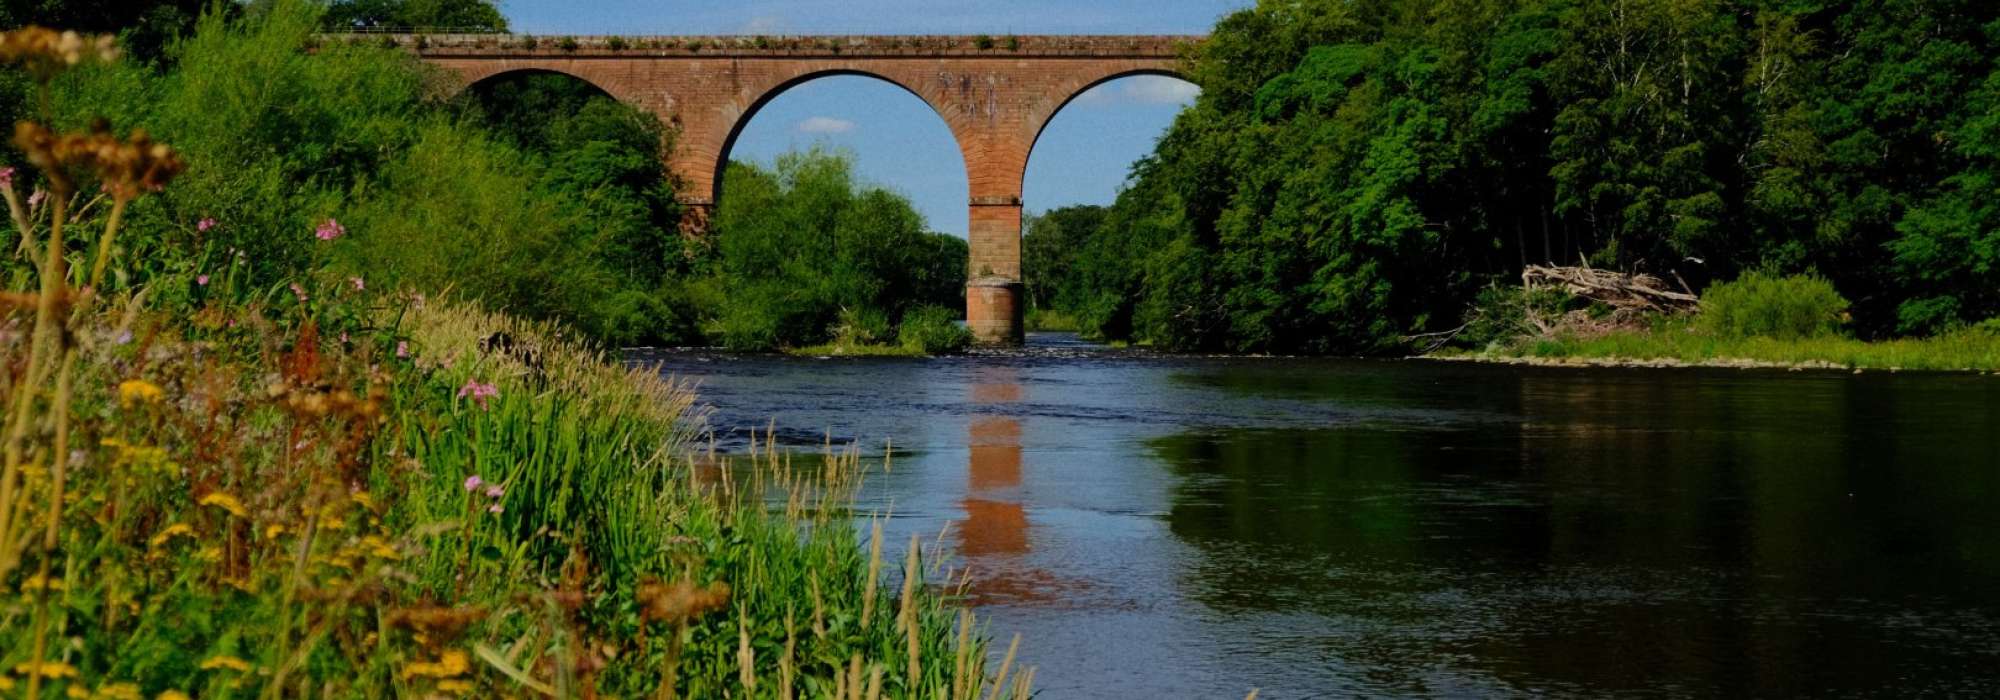 River Eden flowing underneath large stone arch bridge at Wetheral, Cumbria. 